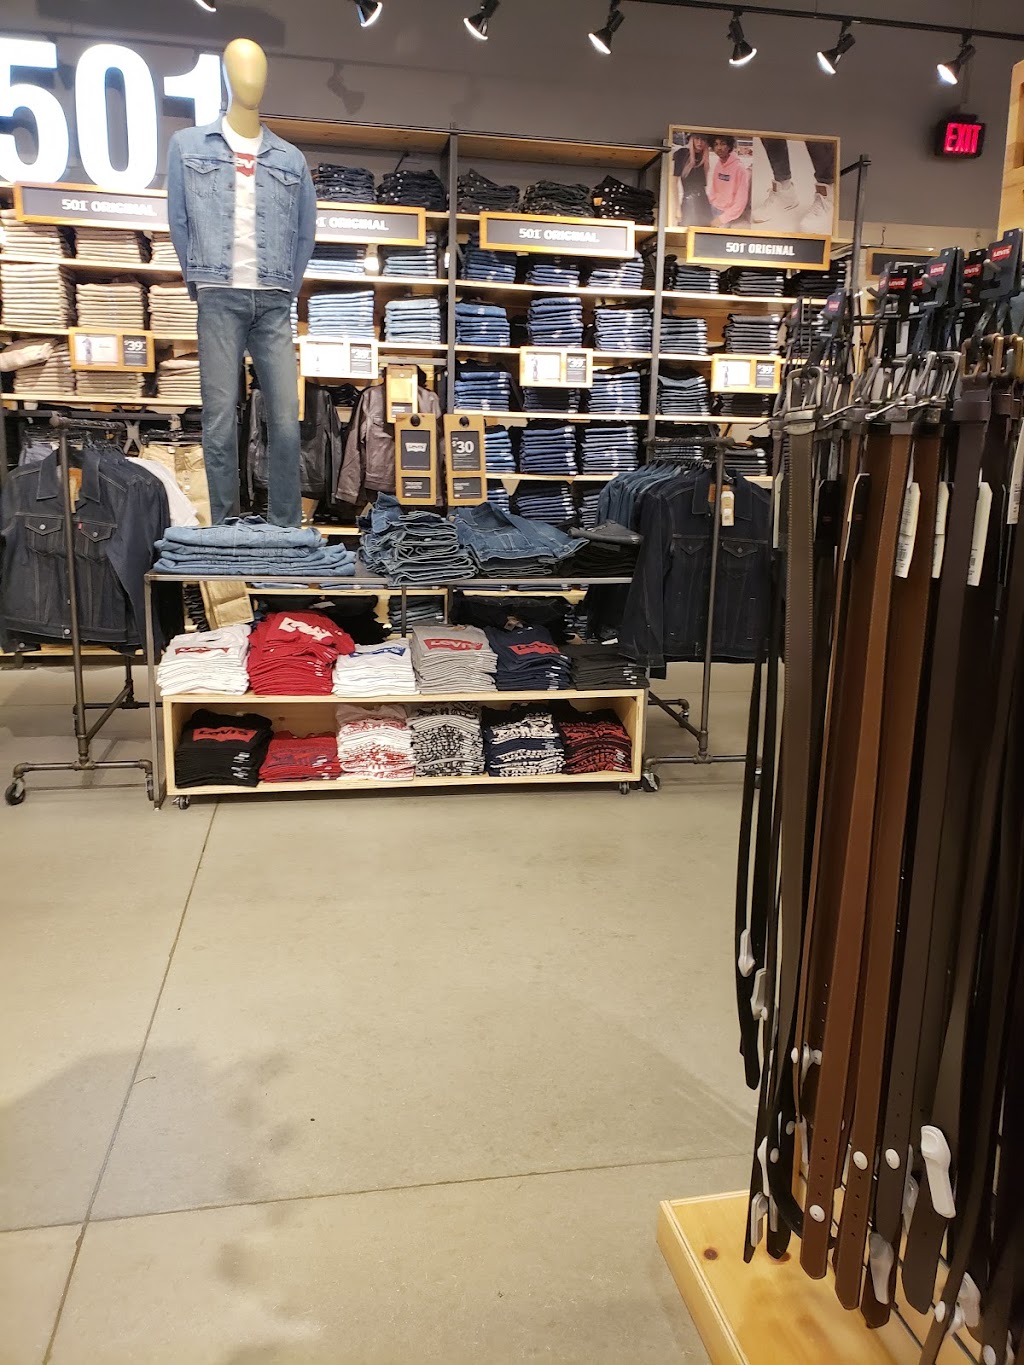 Levis Outlet Store | 5205 Airways Blvd Suite 750, Southaven, MS 38671, USA | Phone: (662) 349-6491